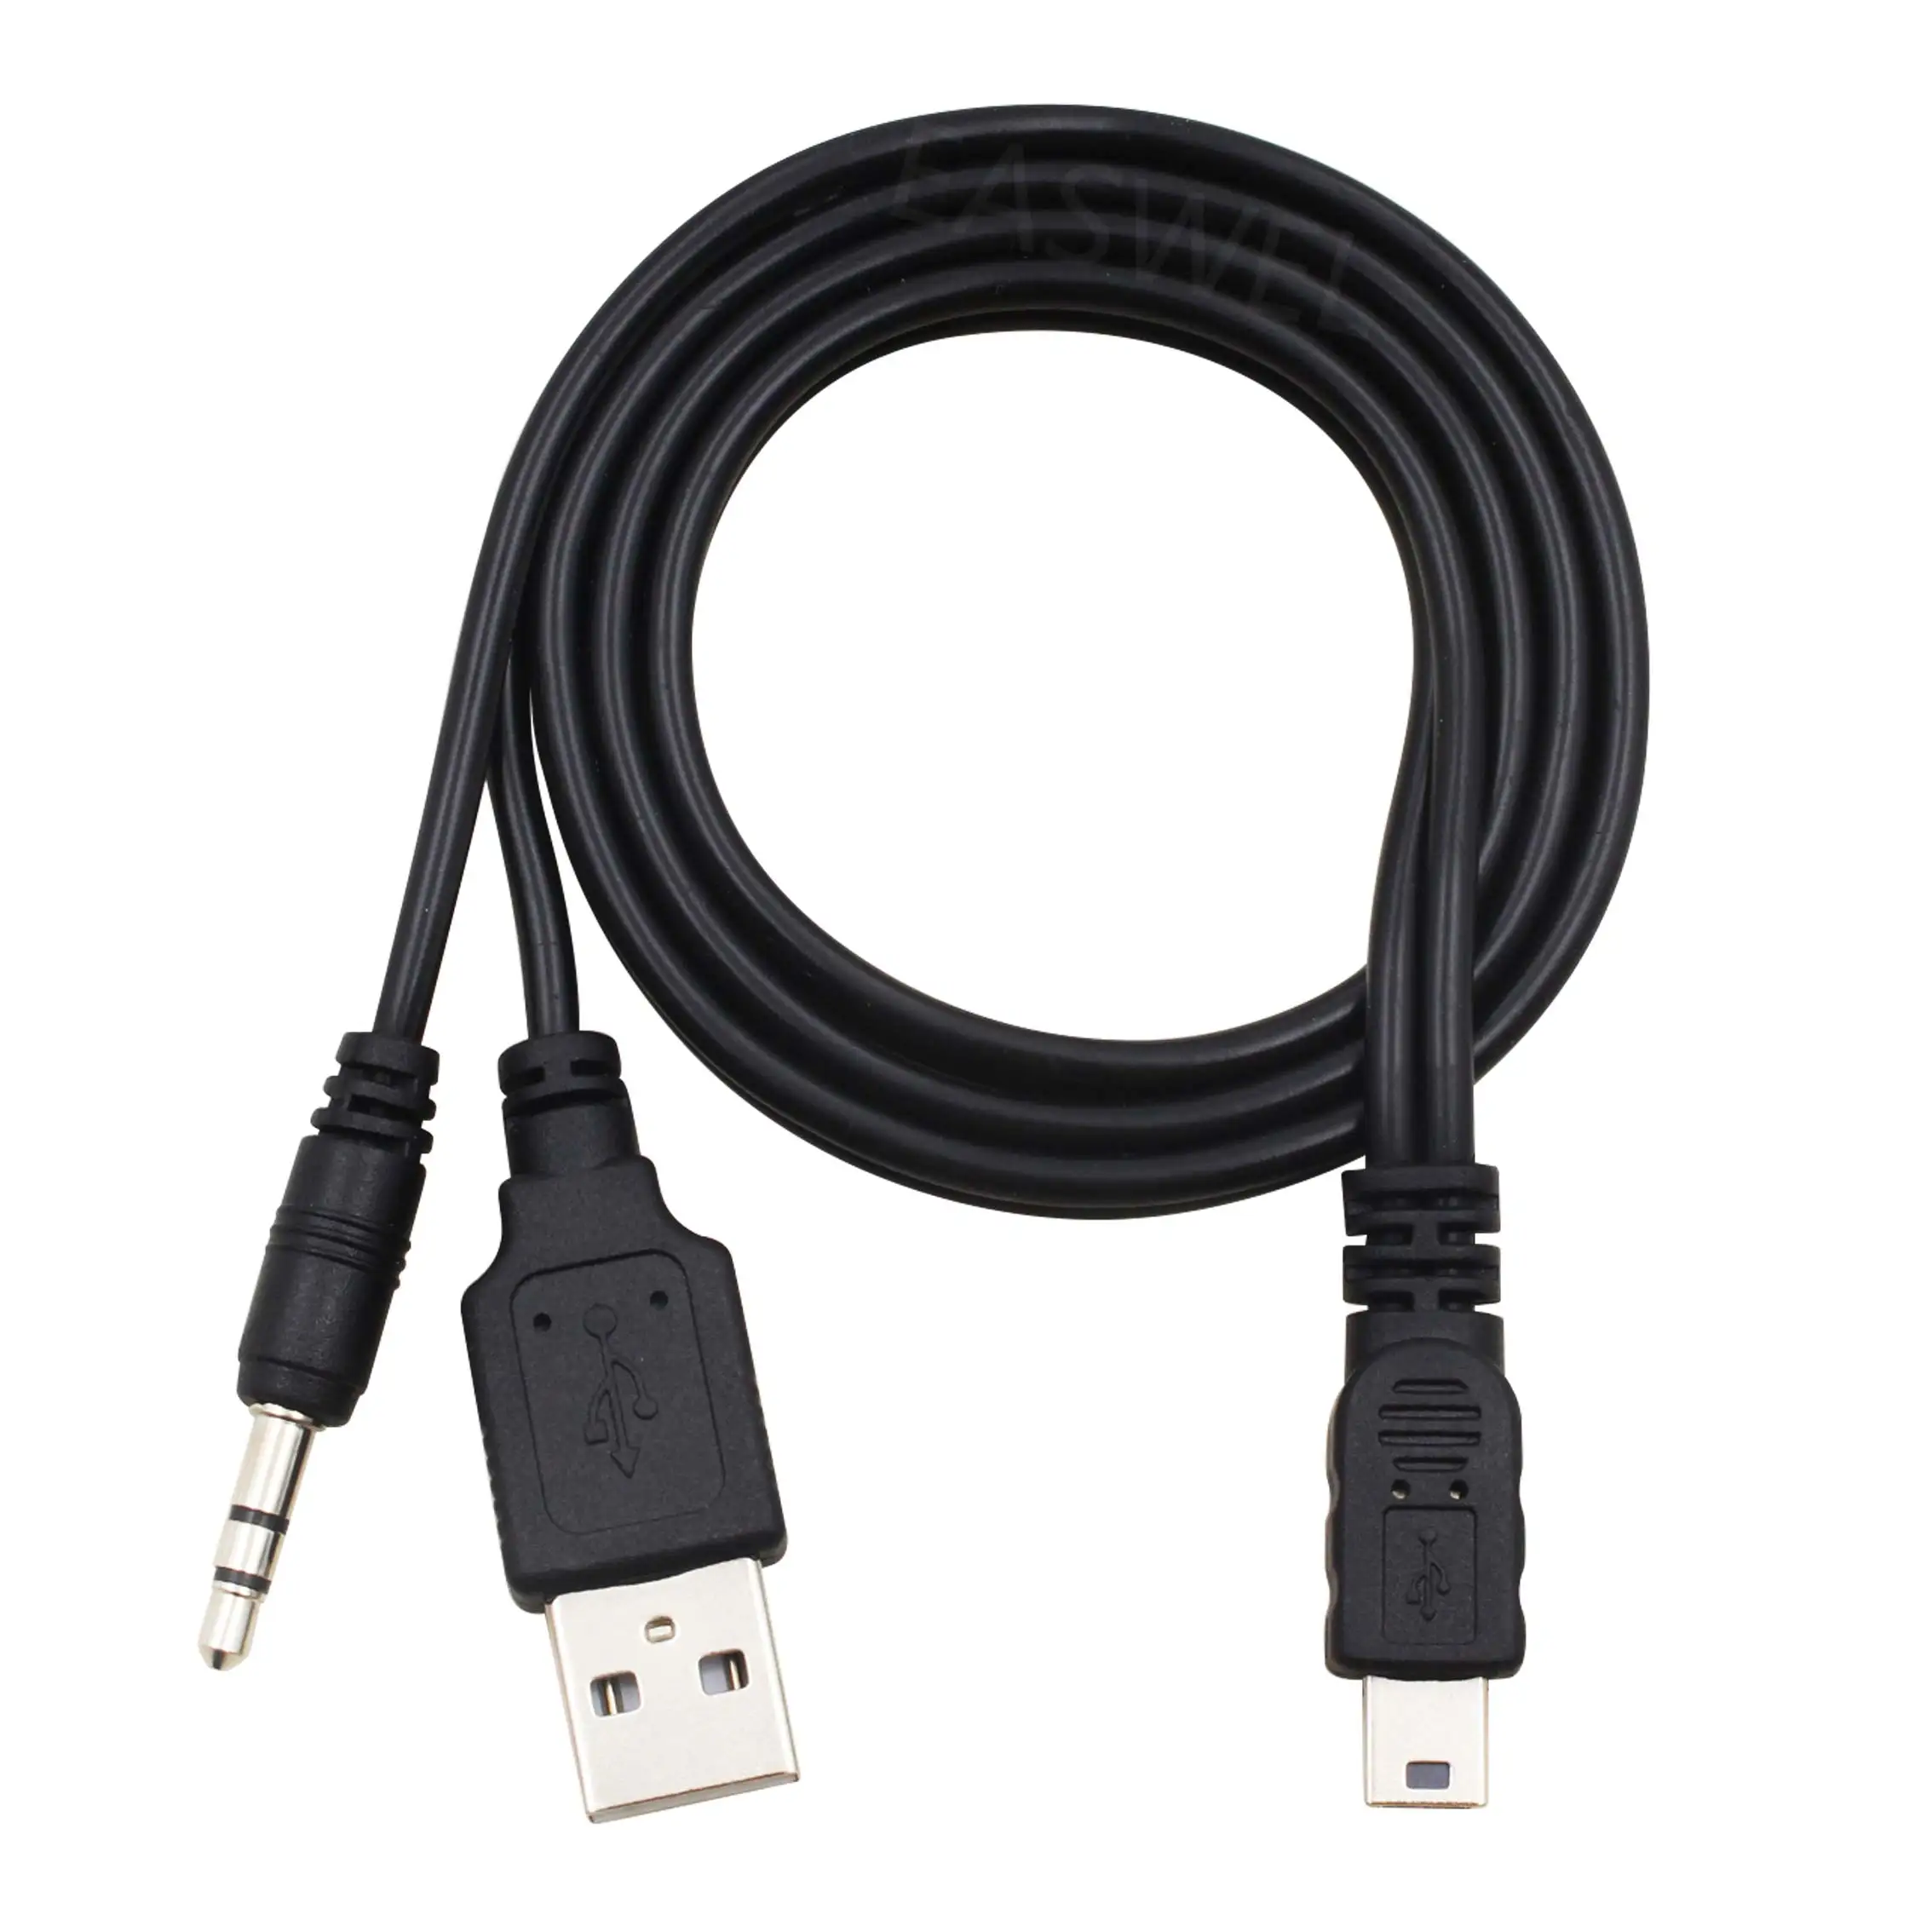 Mini USB & Data Sync Charger Cable for Betron KBS08 Bluetooth Wireless Speaker 